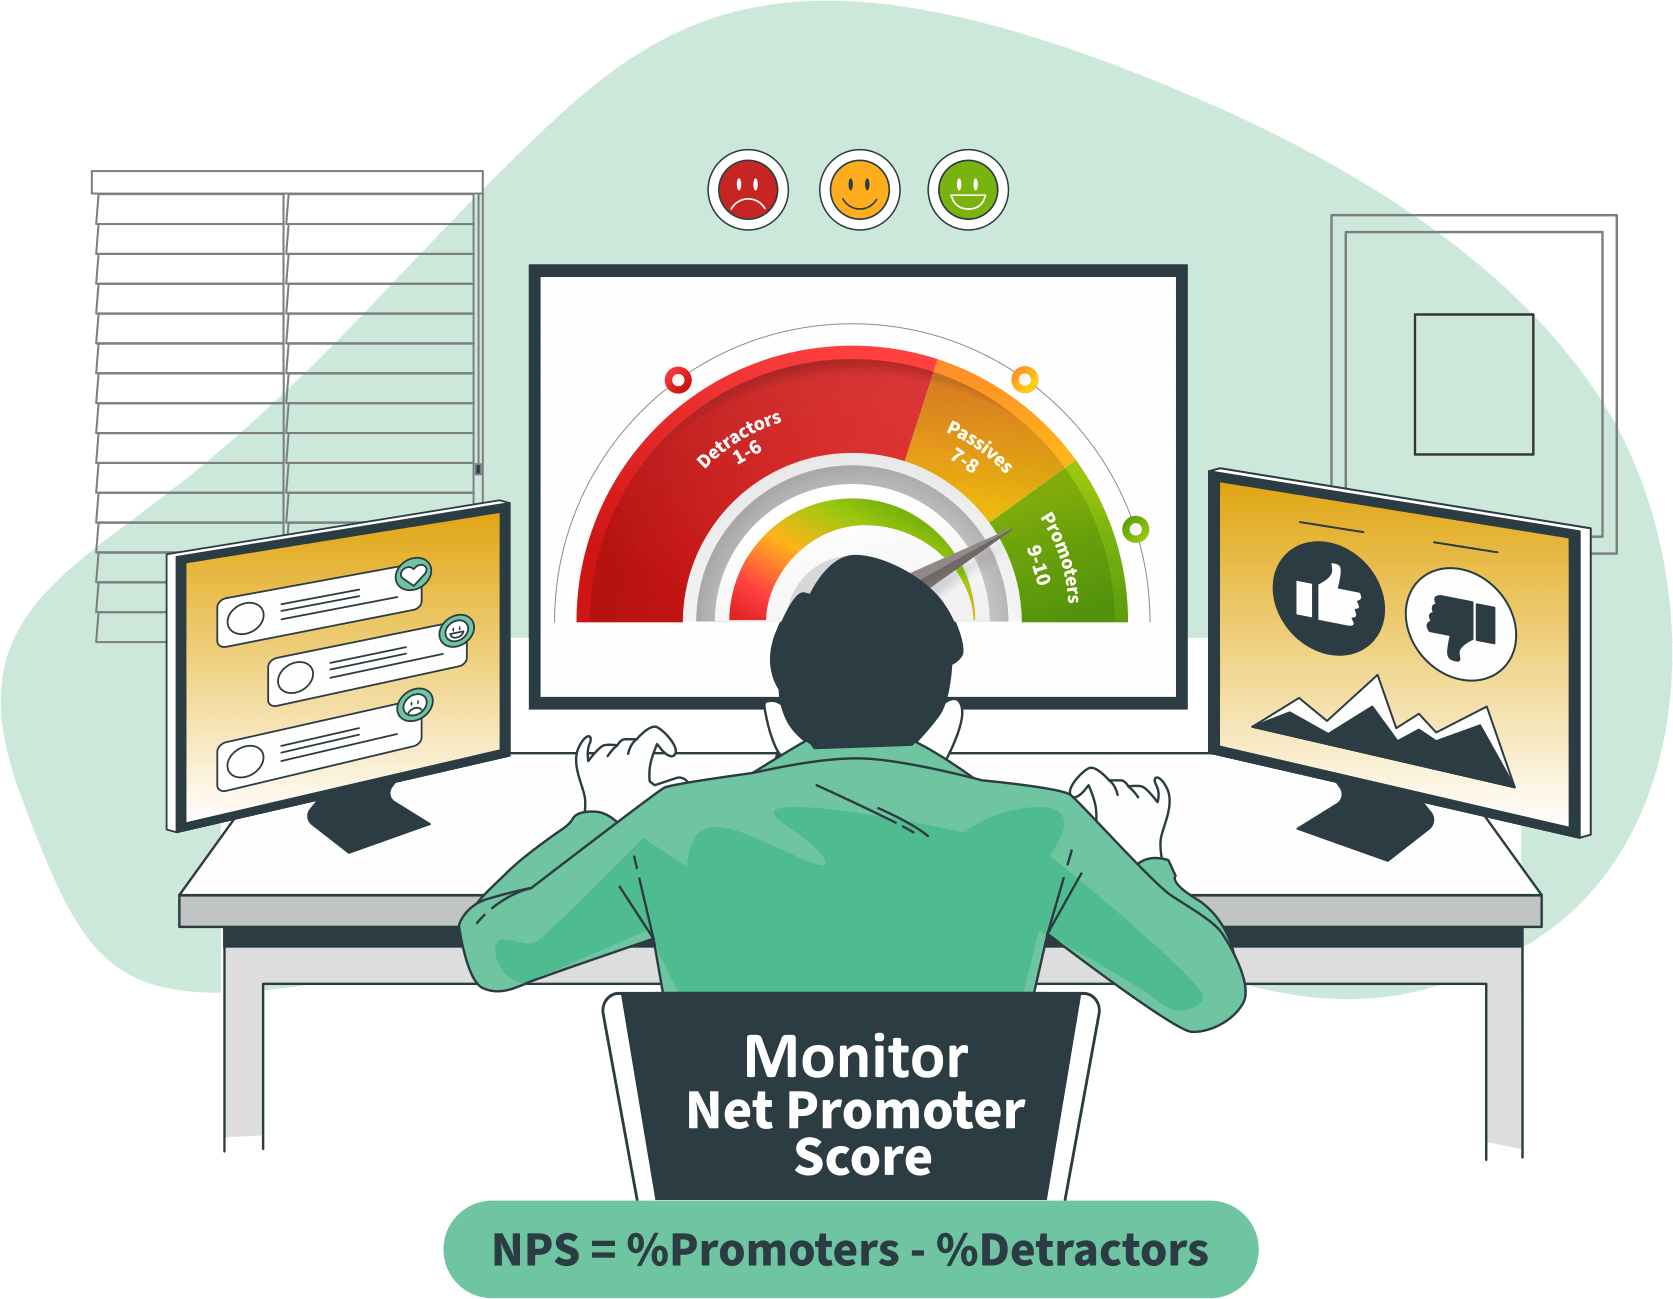 Importance of monitoring NPS (Net Promoter Score) for DTC (Direct-to-Consumer) businesses.